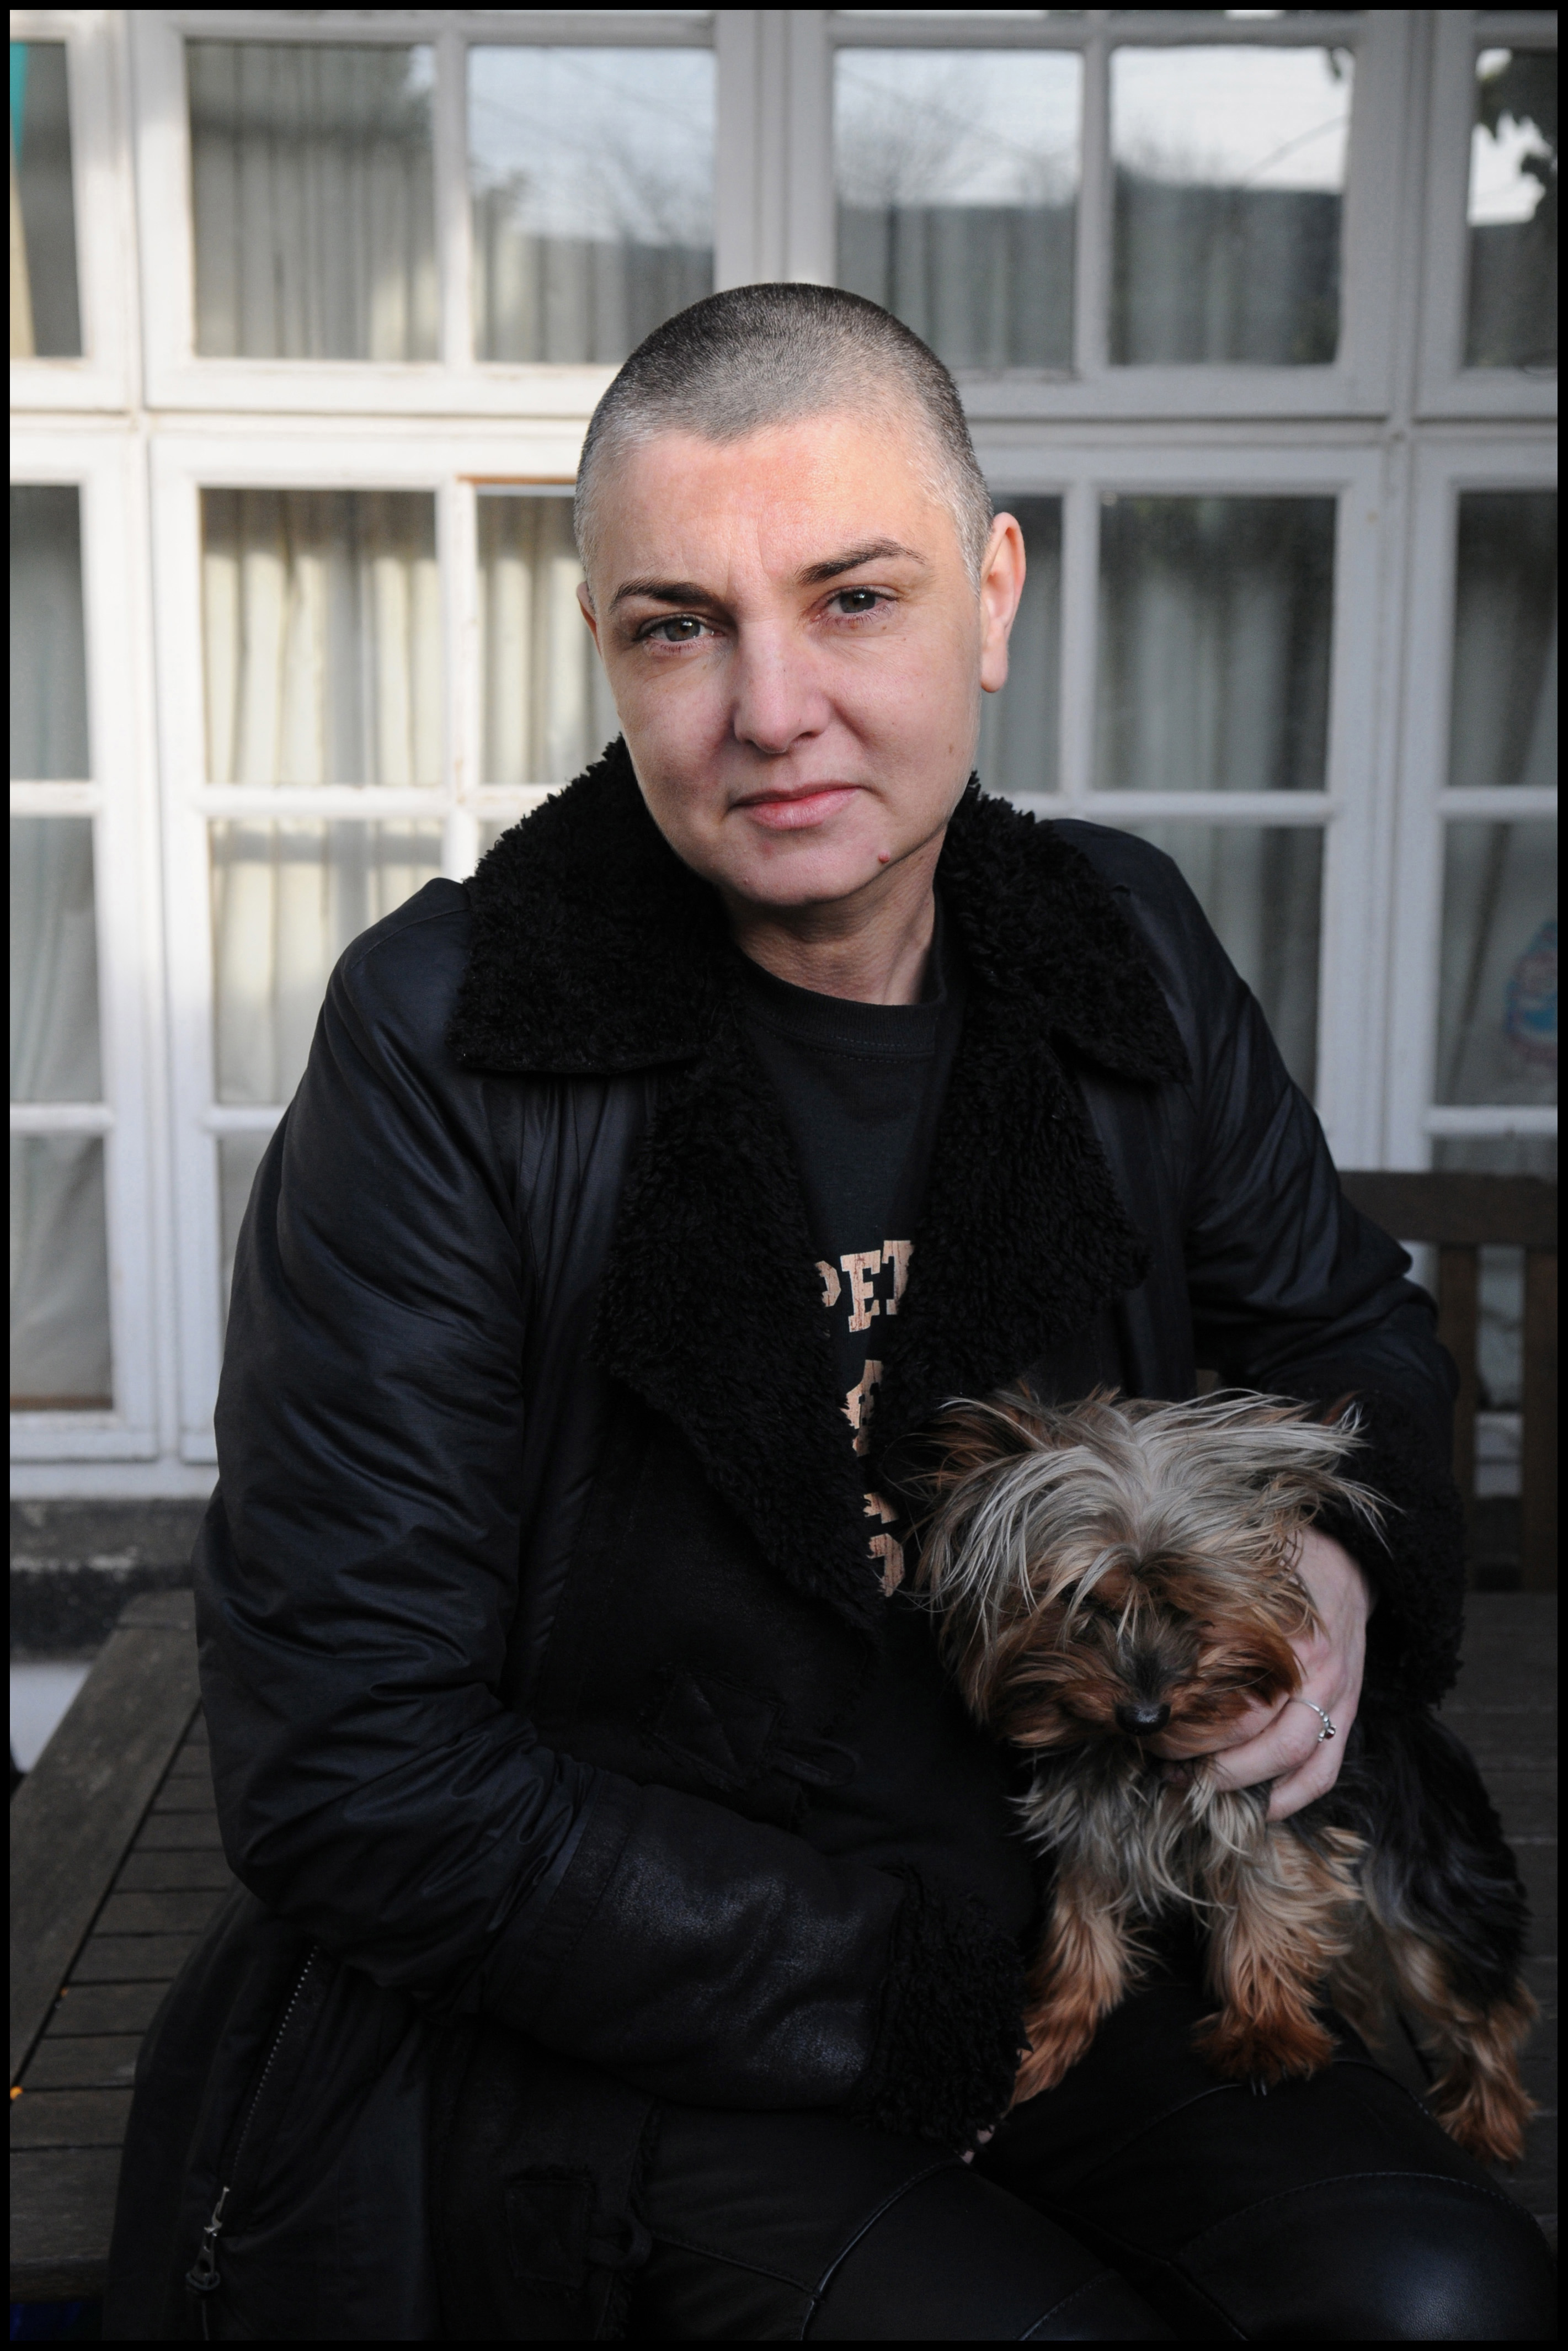 Sinéad O'Connor posing with her dog at her home in County Wicklow, Ireland, on February 3, 2012 | Source: Getty Images